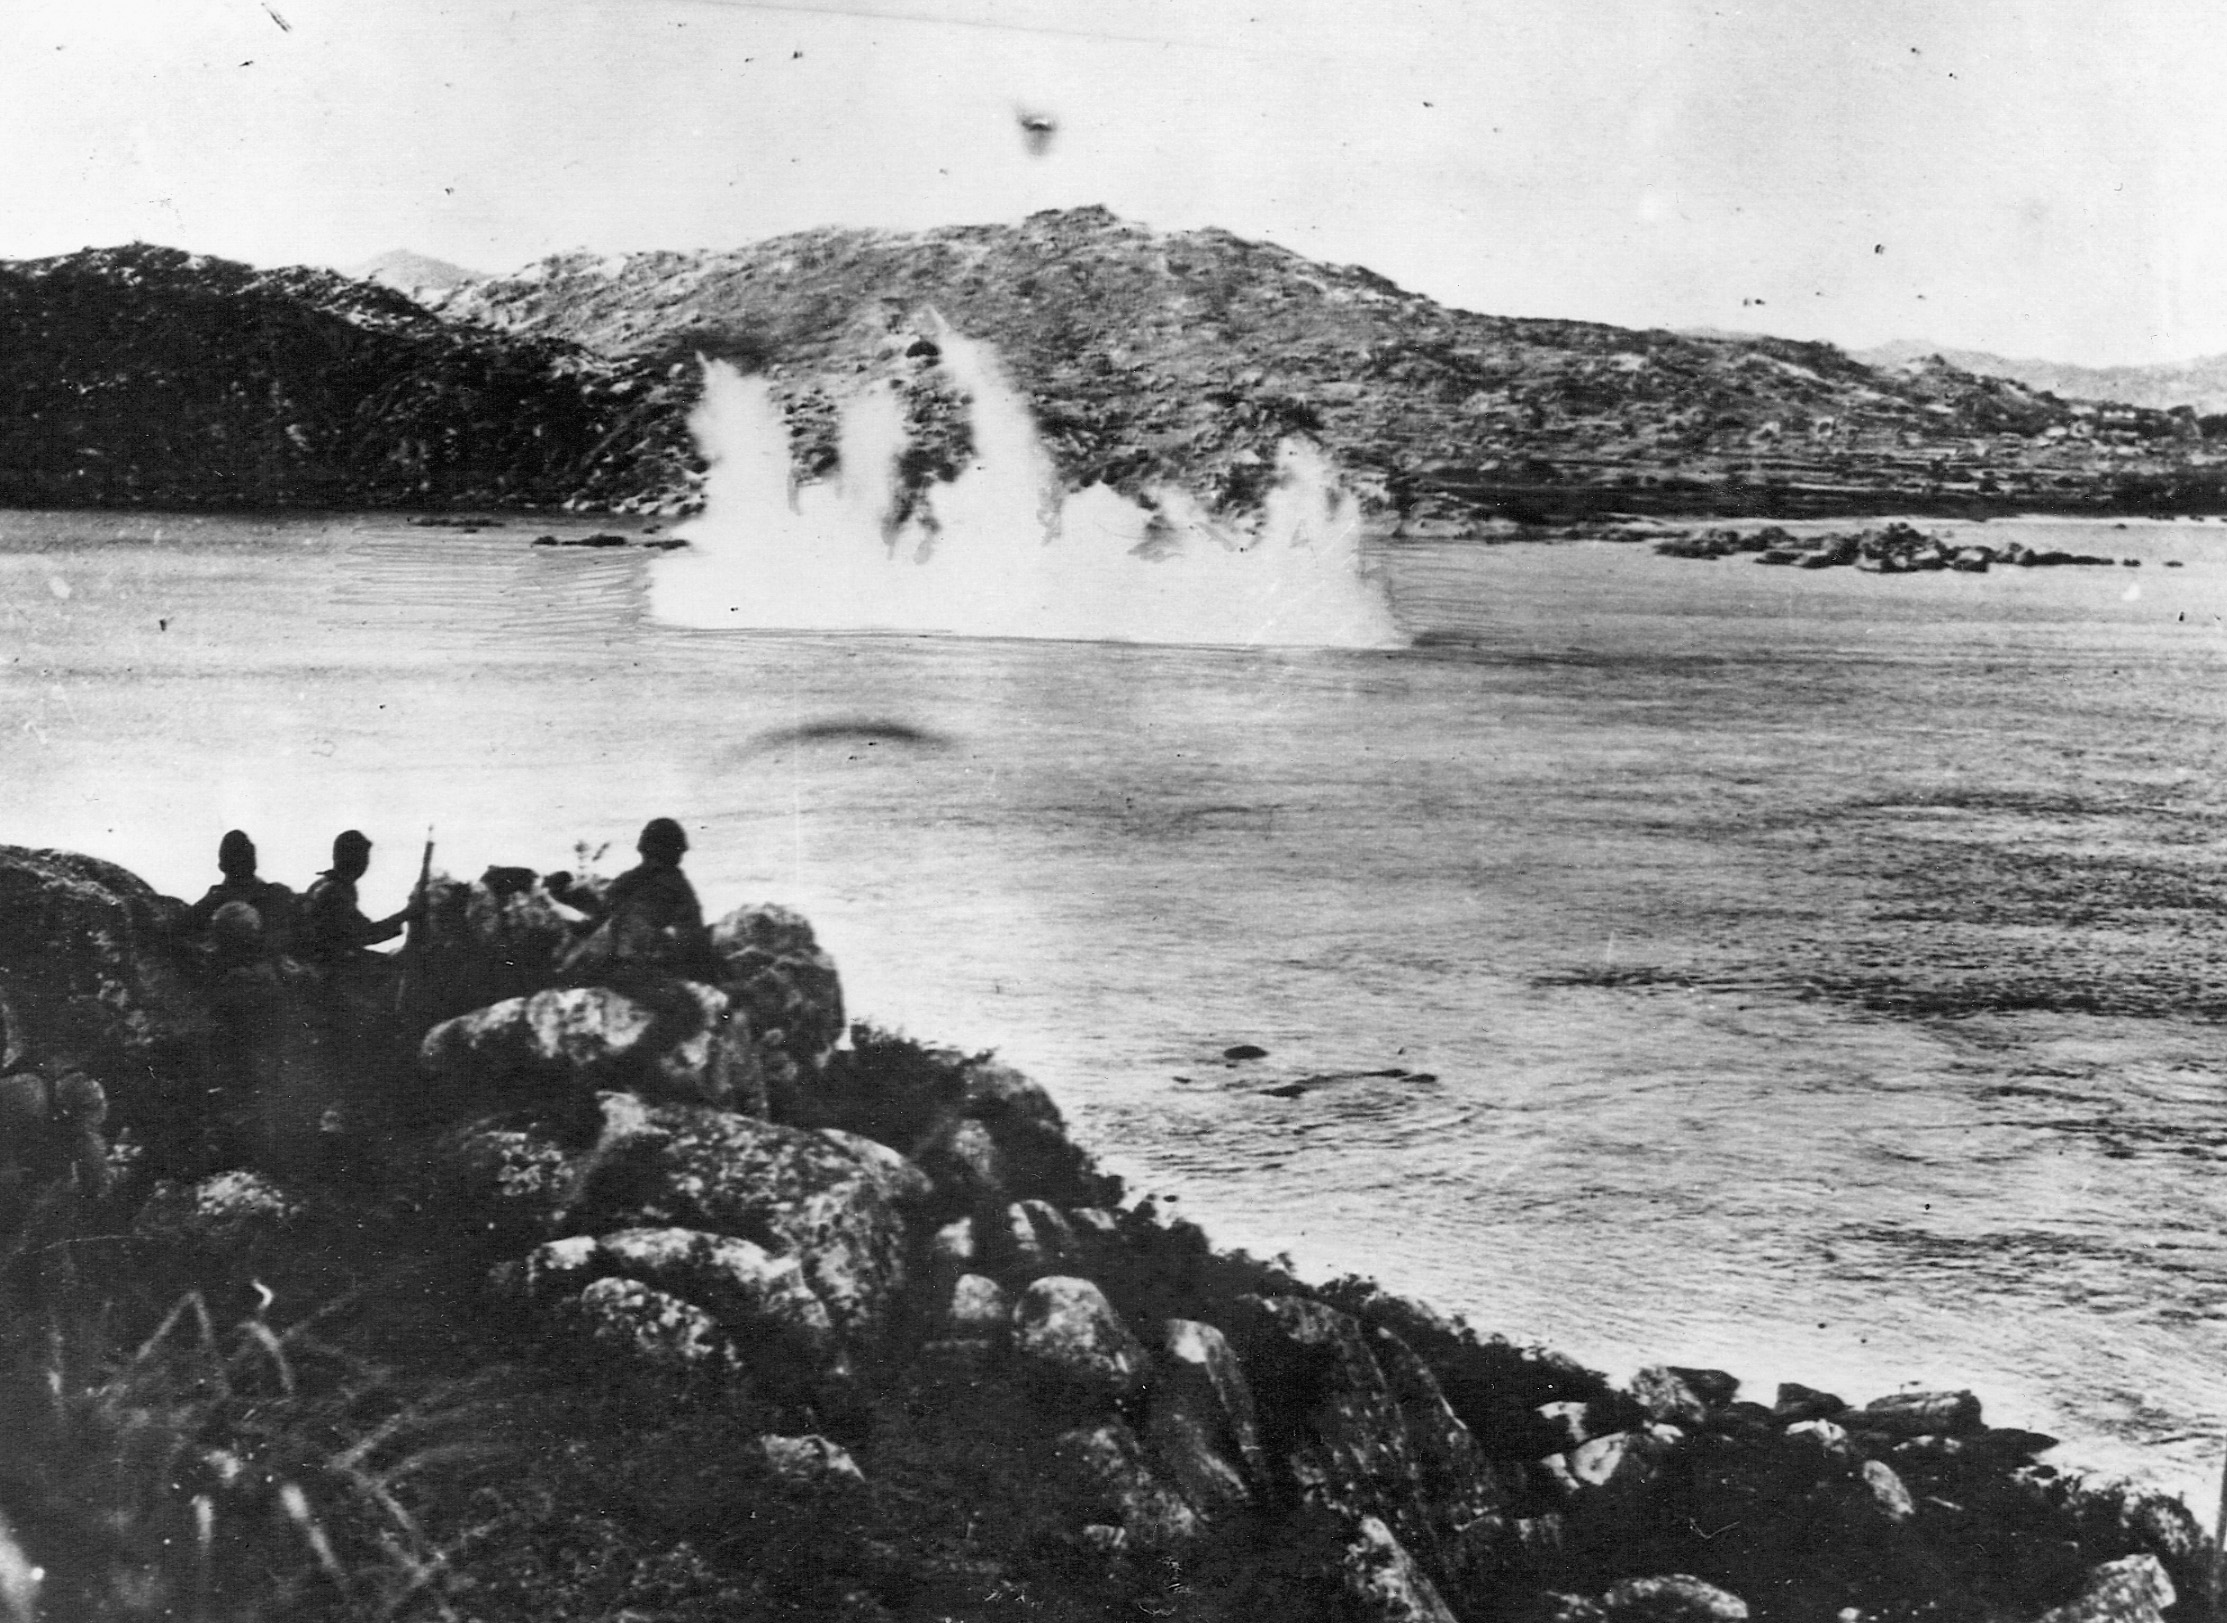 As a group of Japanese soldiers watches from ashore, a detonated mine sends plumes of water from the Yangtze River.